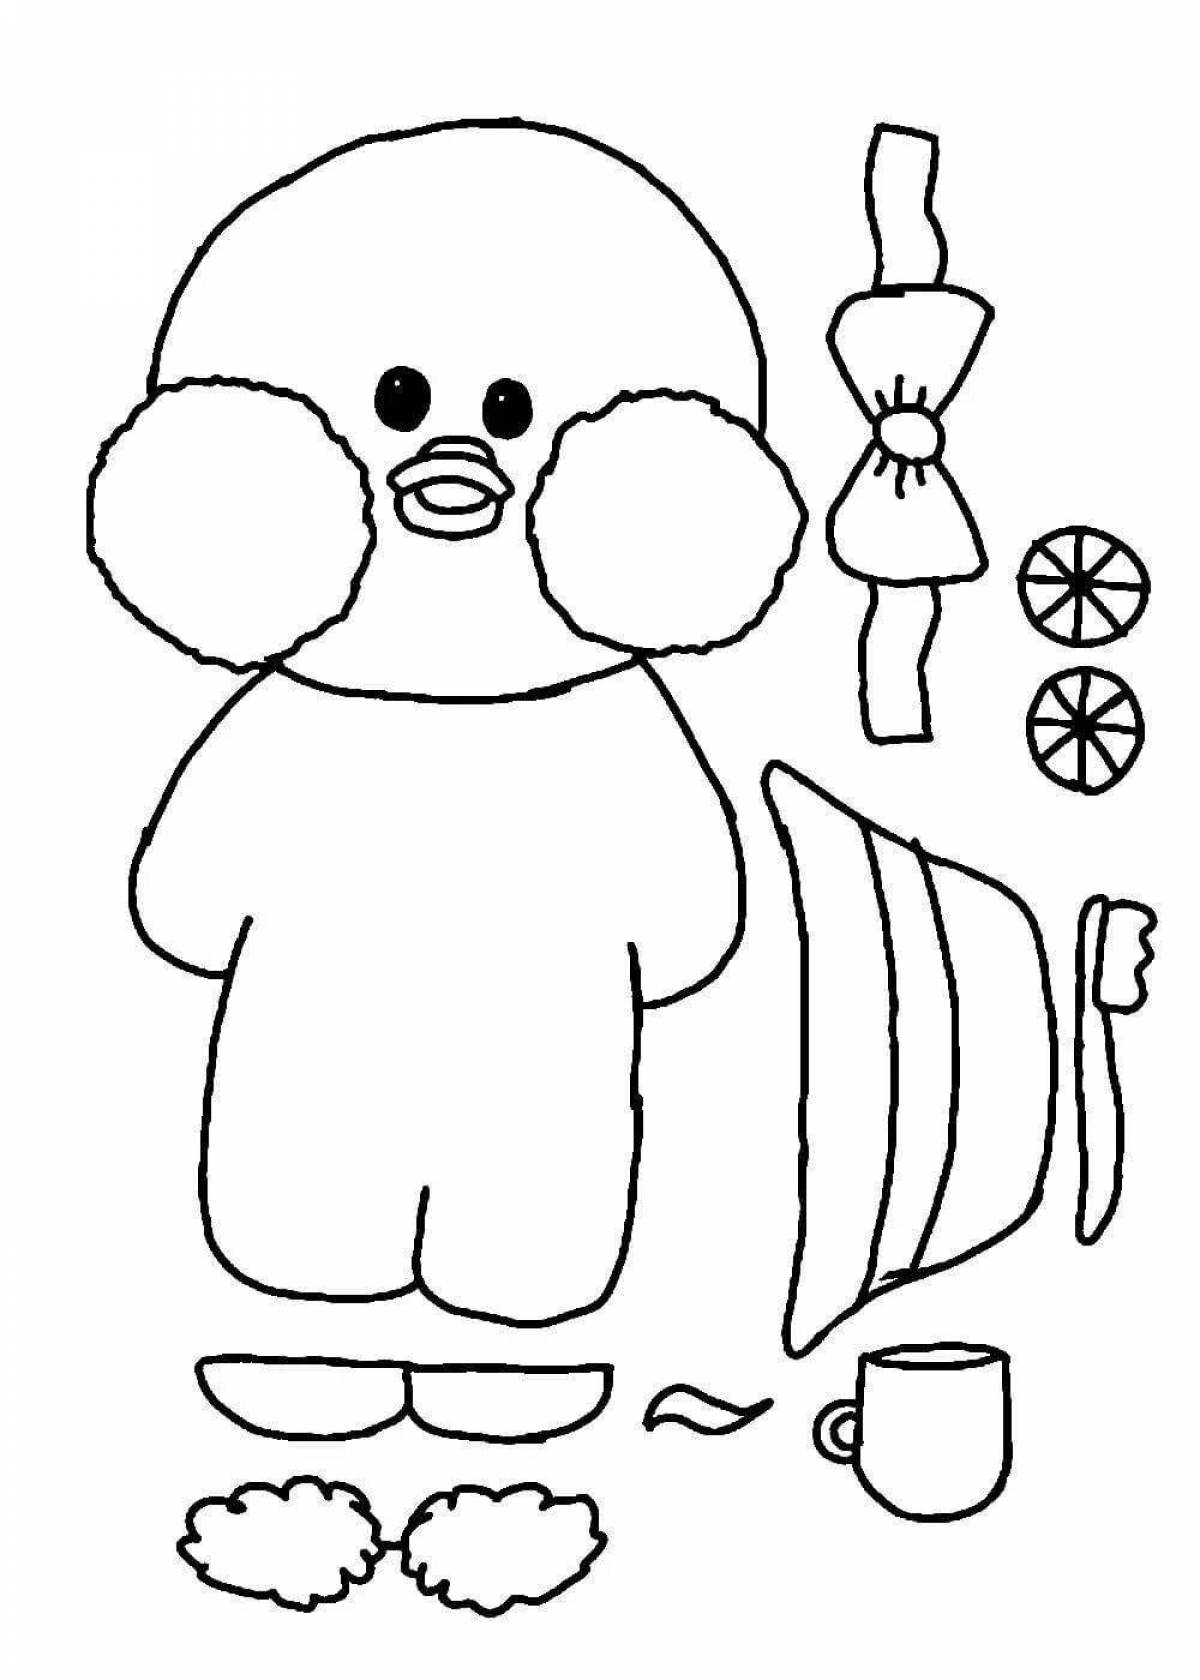 Cute lalafanfan duck coloring pages